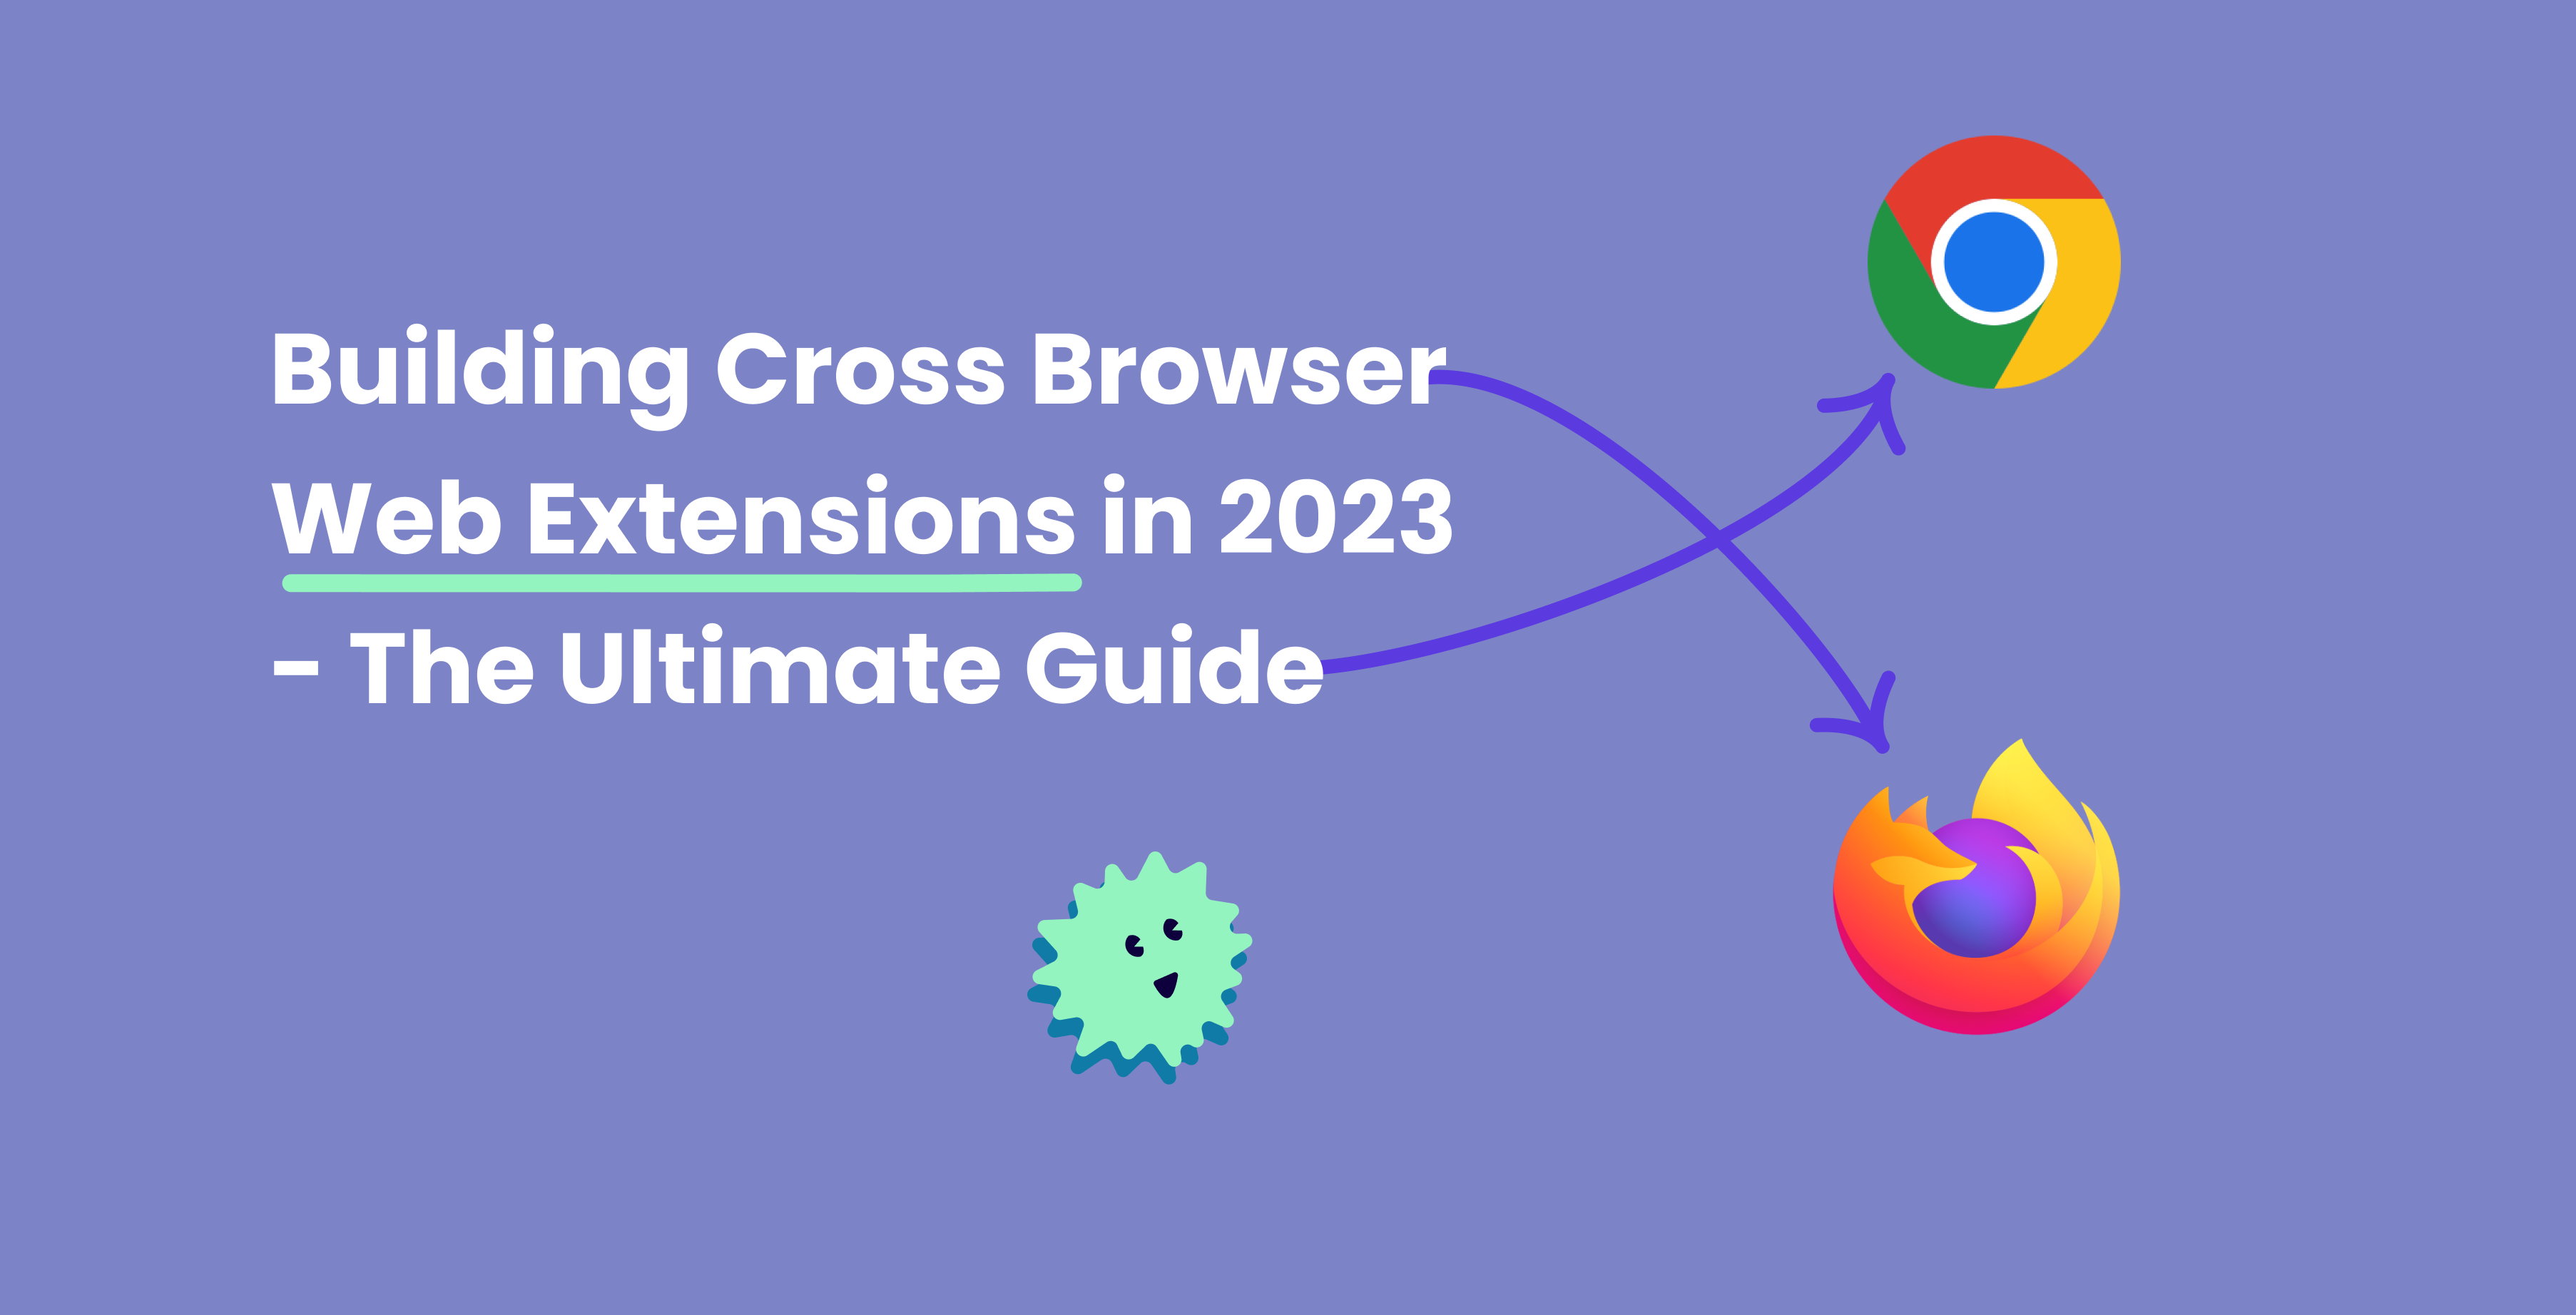 Building Cross Browser Web Extensions in 2023 - The Ultimate Guide